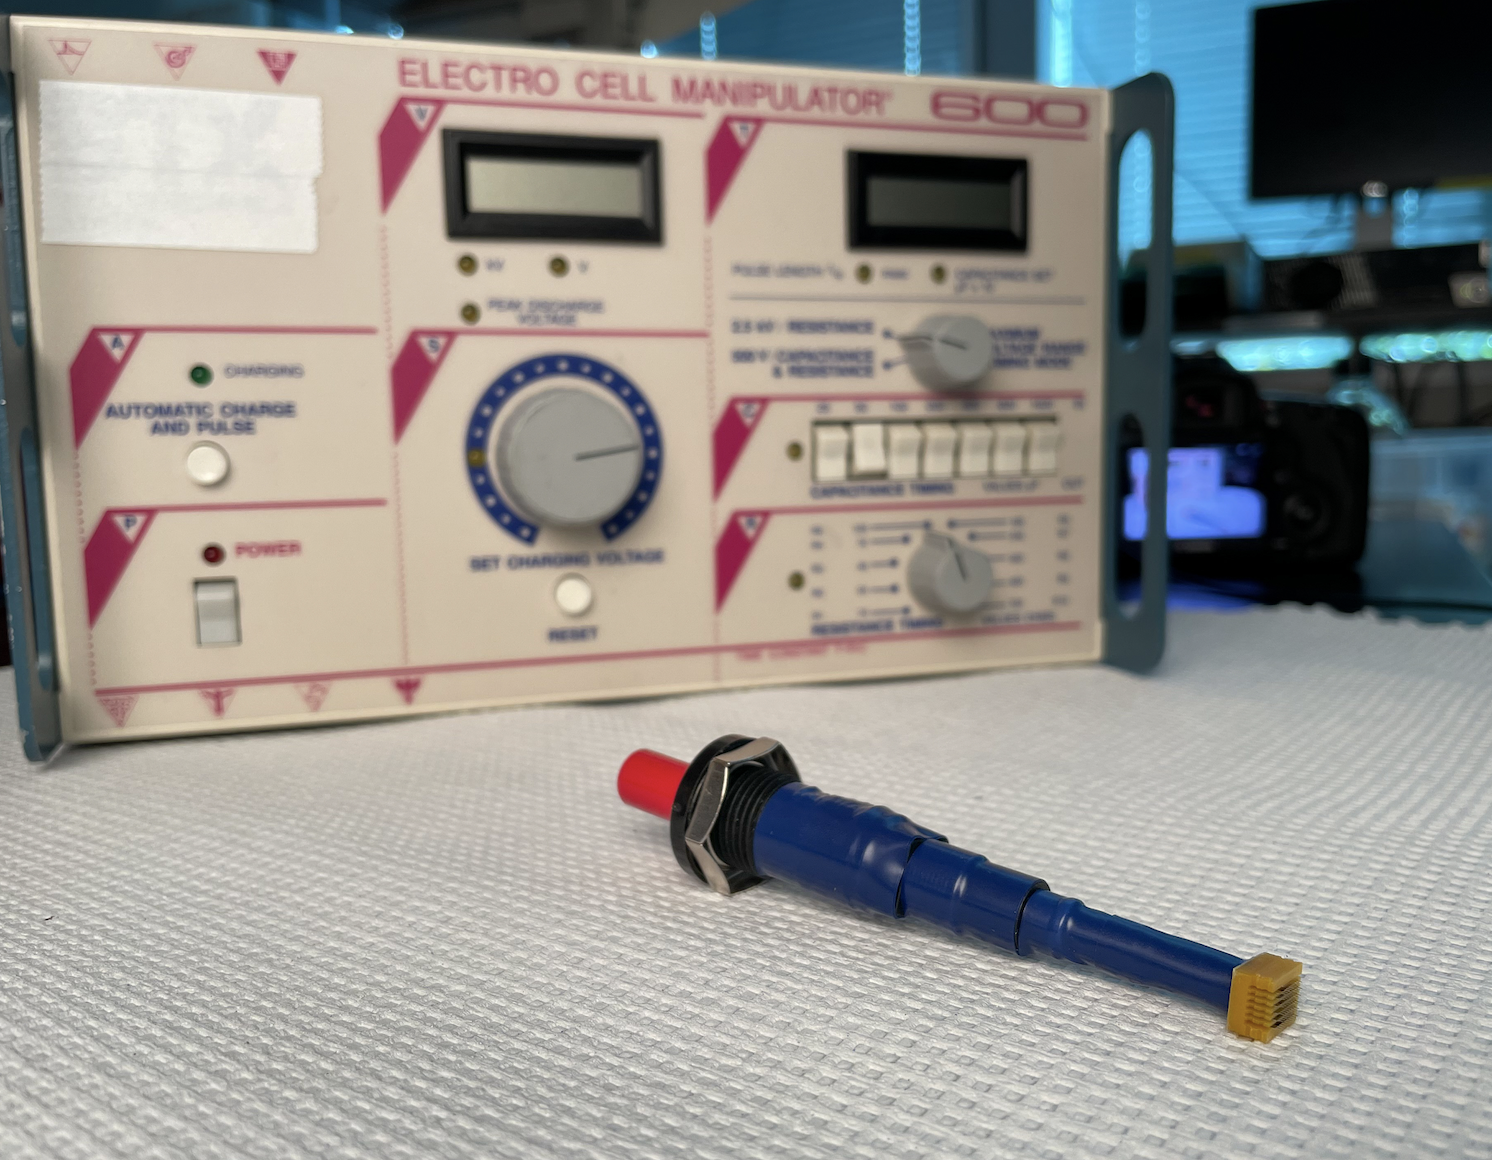 A traditional electroporation machine is much larger and complex than the handheld ePatch device.